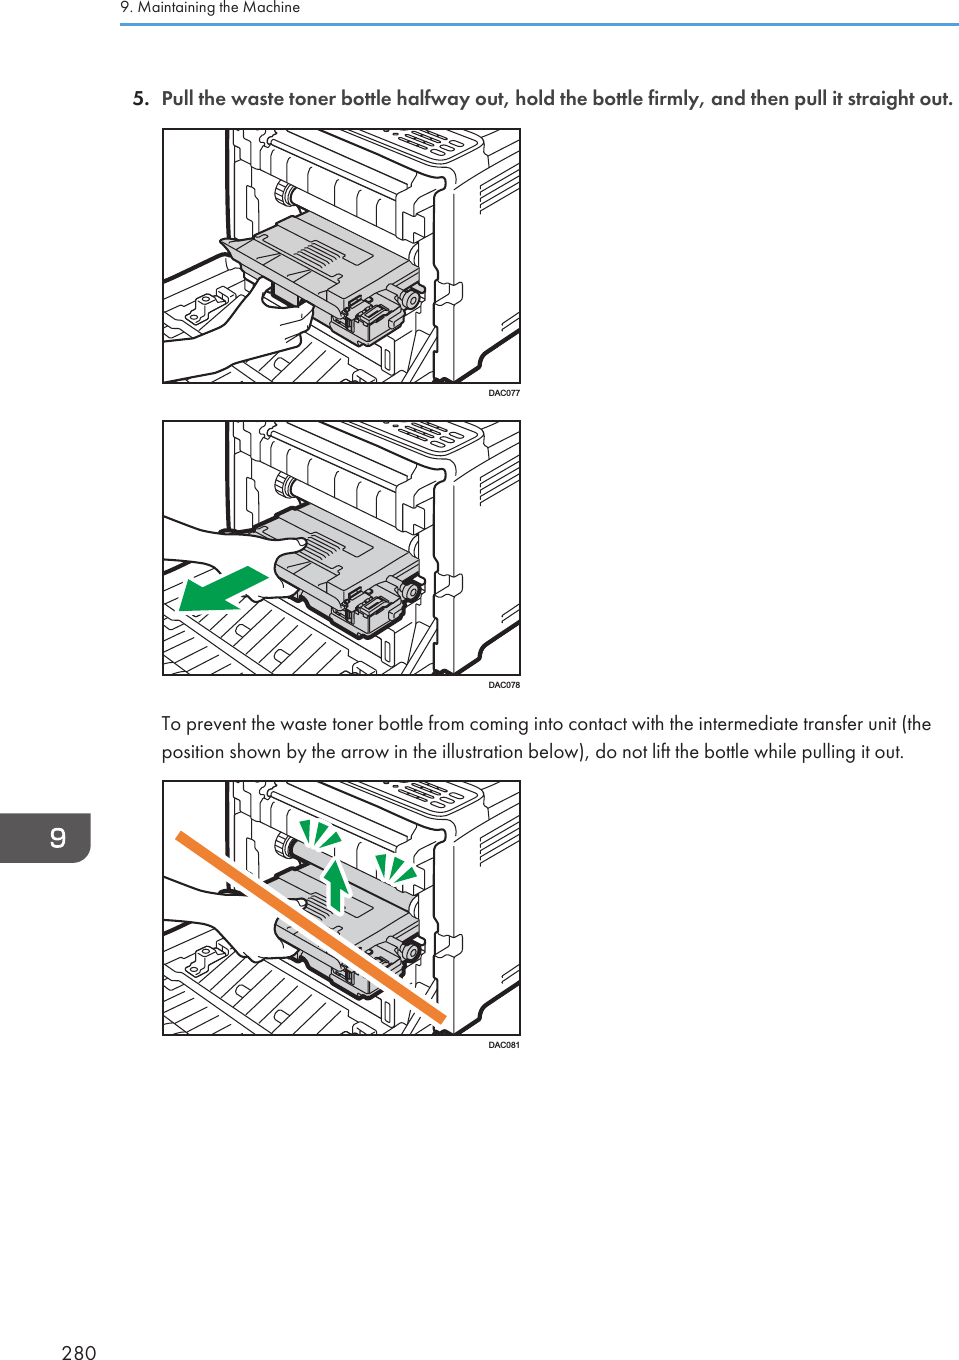 5. Pull the waste toner bottle halfway out, hold the bottle firmly, and then pull it straight out.DAC077DAC078To prevent the waste toner bottle from coming into contact with the intermediate transfer unit (theposition shown by the arrow in the illustration below), do not lift the bottle while pulling it out.DAC0819. Maintaining the Machine280